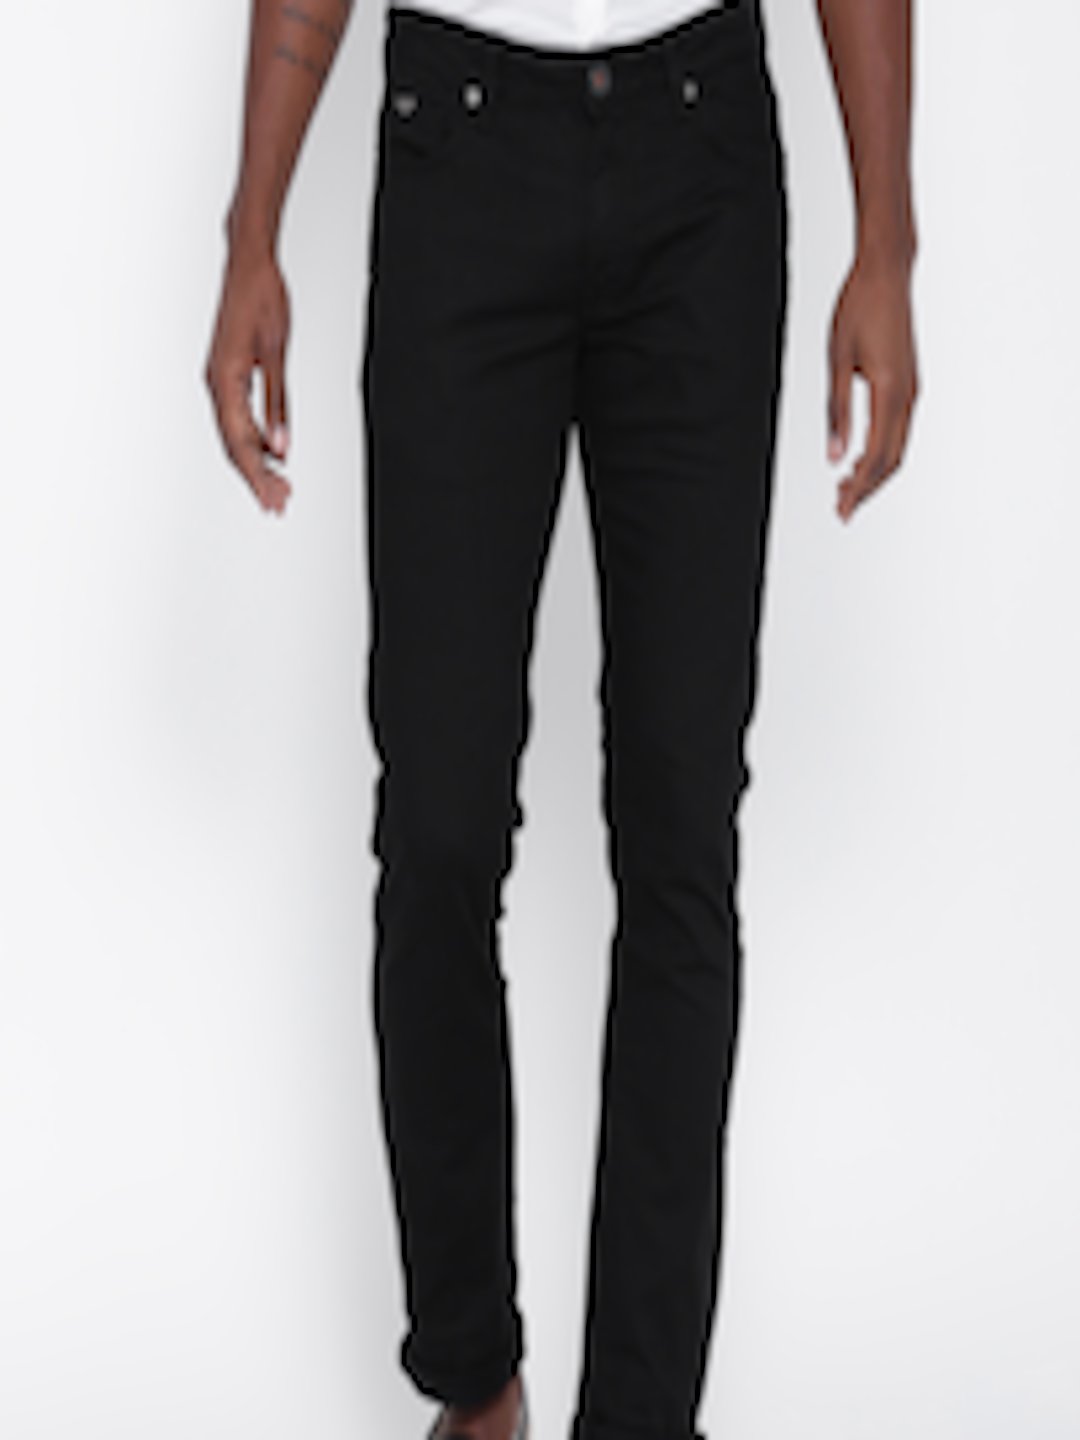 Buy United Colors Of Benetton Men Black Skinny Fit Stretchable Jeans ...